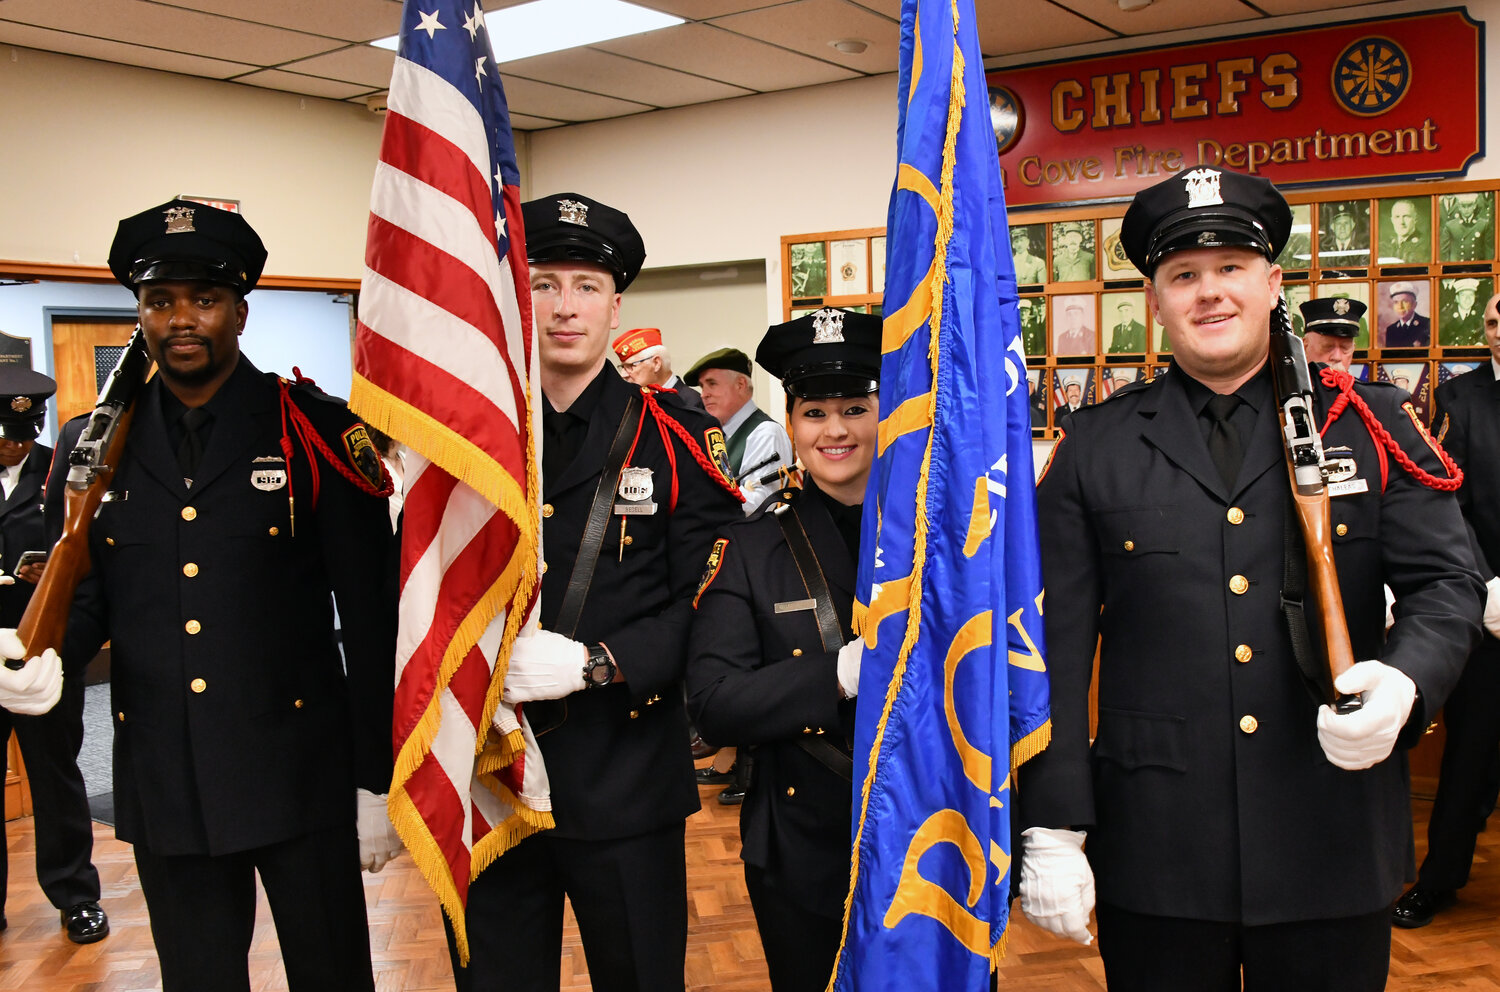 The honor guard was on hand to honor the fallen on the mournful day. Peter Michaleas, far left, Benjamin Bdell, Selena Guastella and Darren Pitttman proudly displayed their patriotism with American flags.